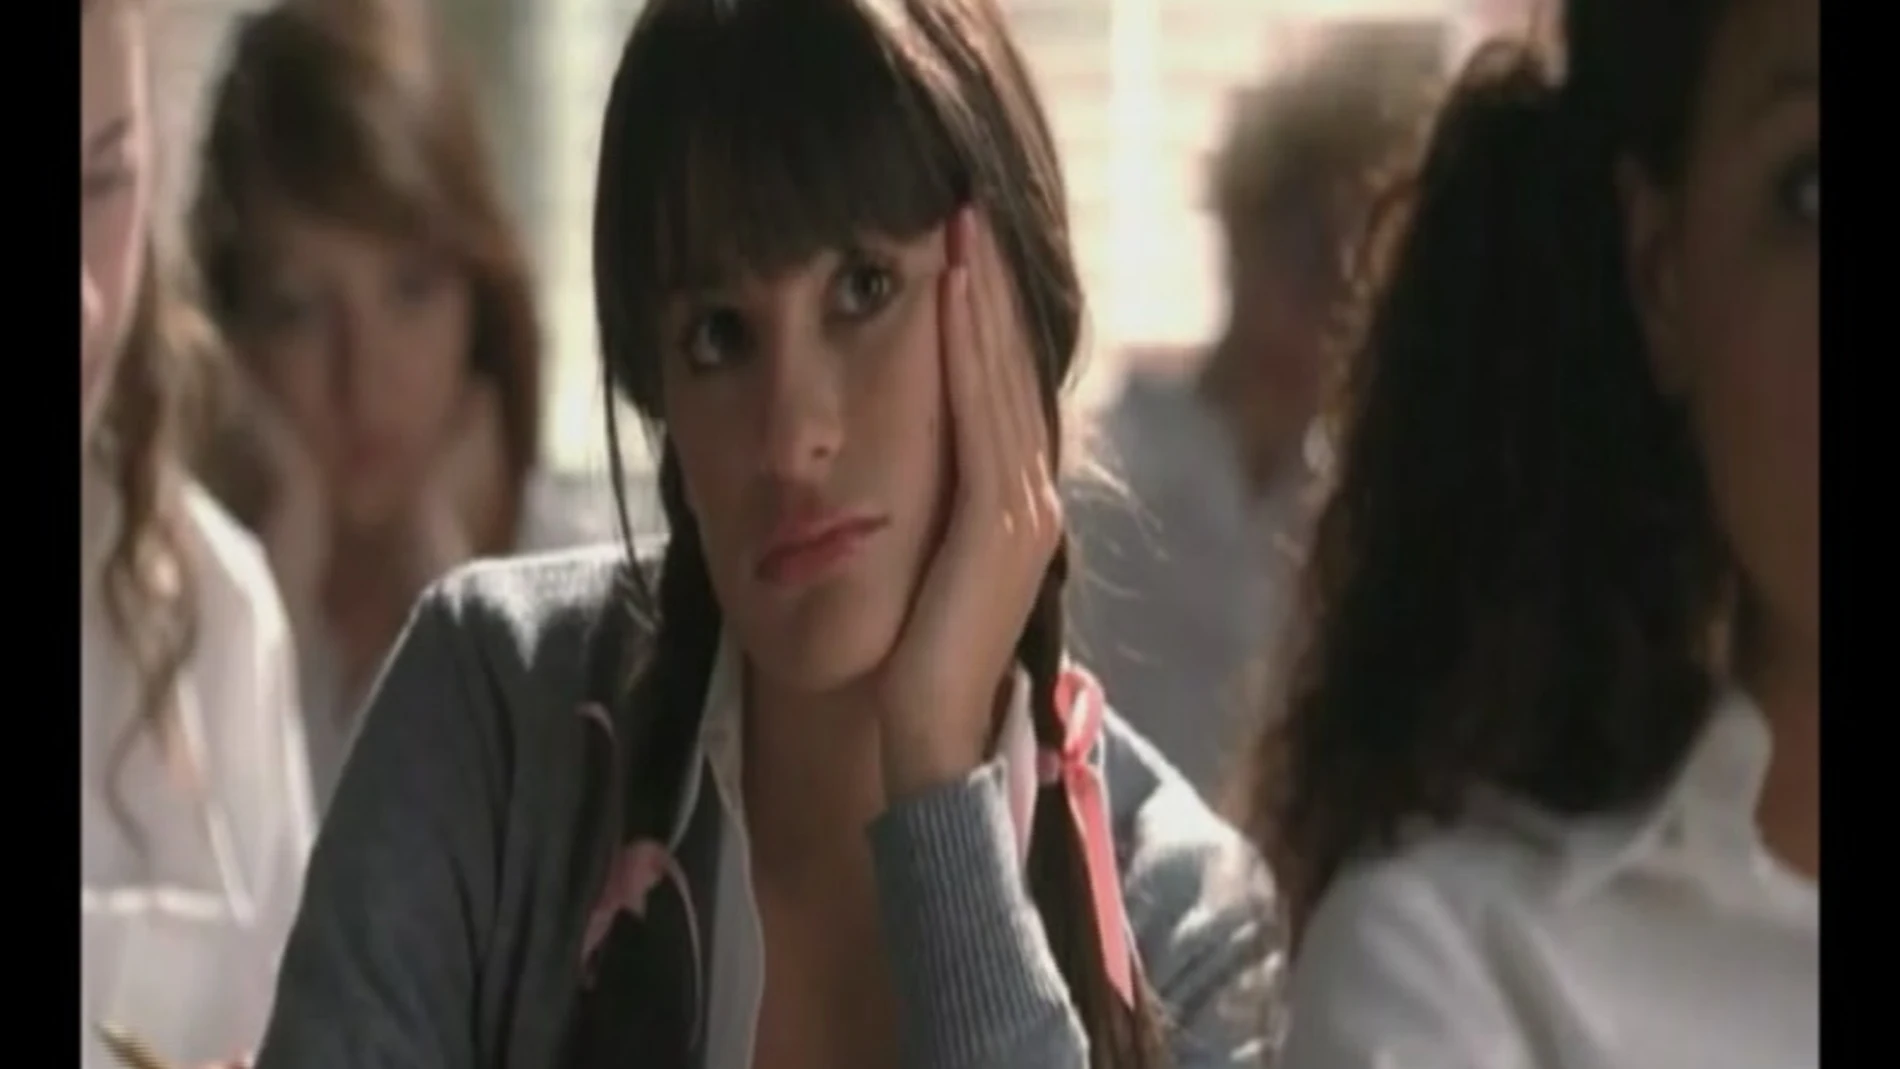 Lea Michele versiona Baby one more time